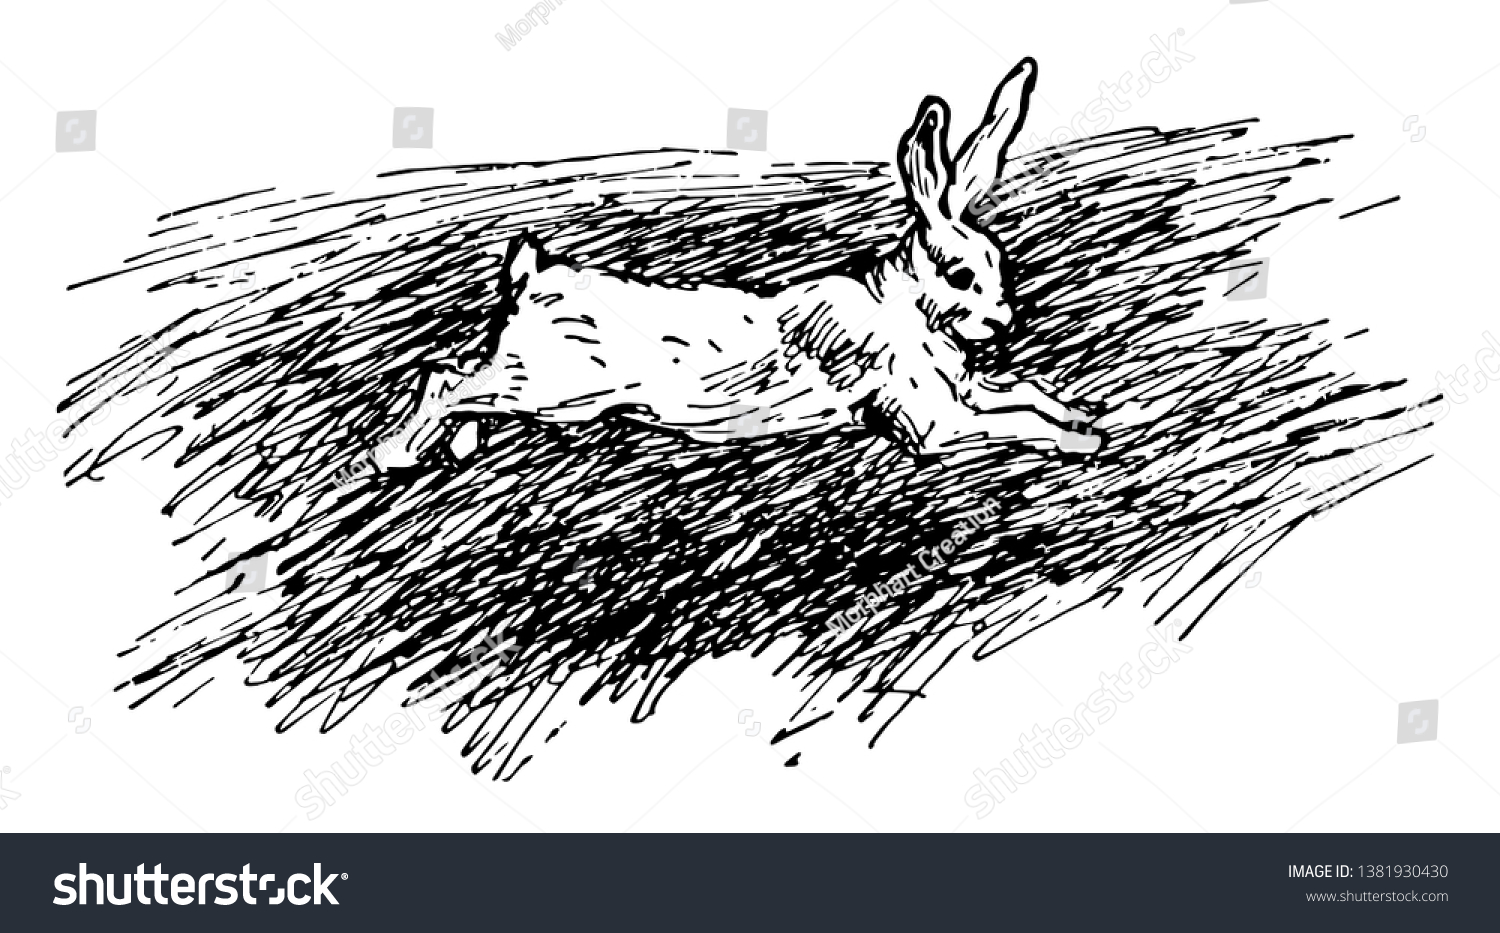 female of rabbit is called